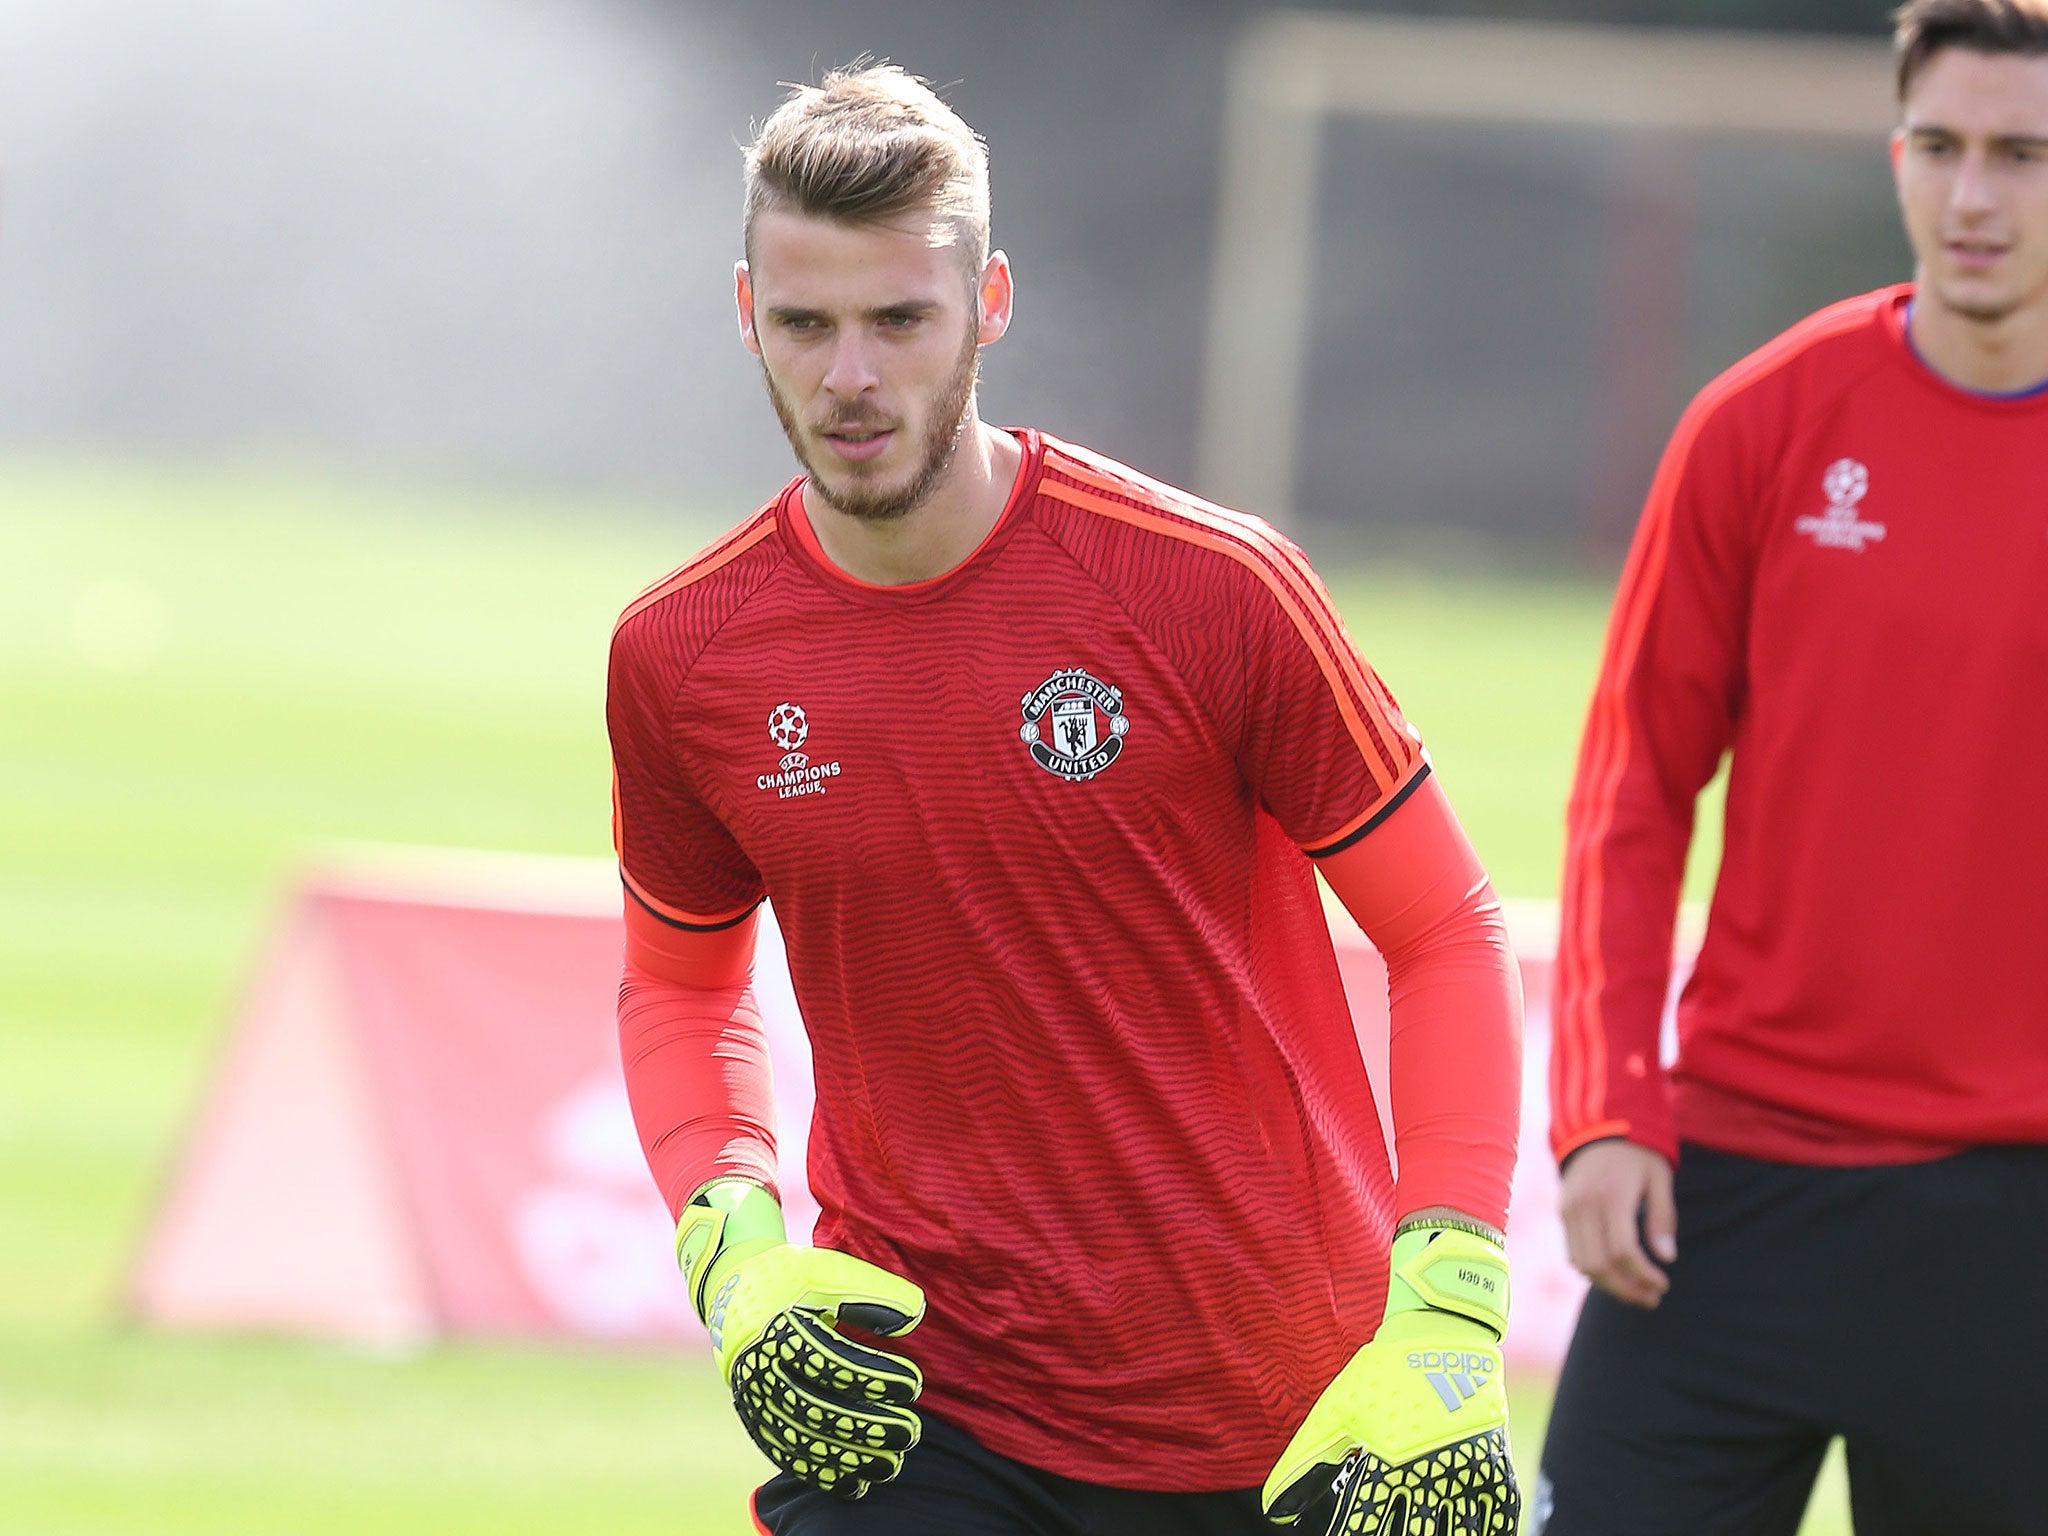 Manchester United goalkeeper David De Gea could still join Real Madrid